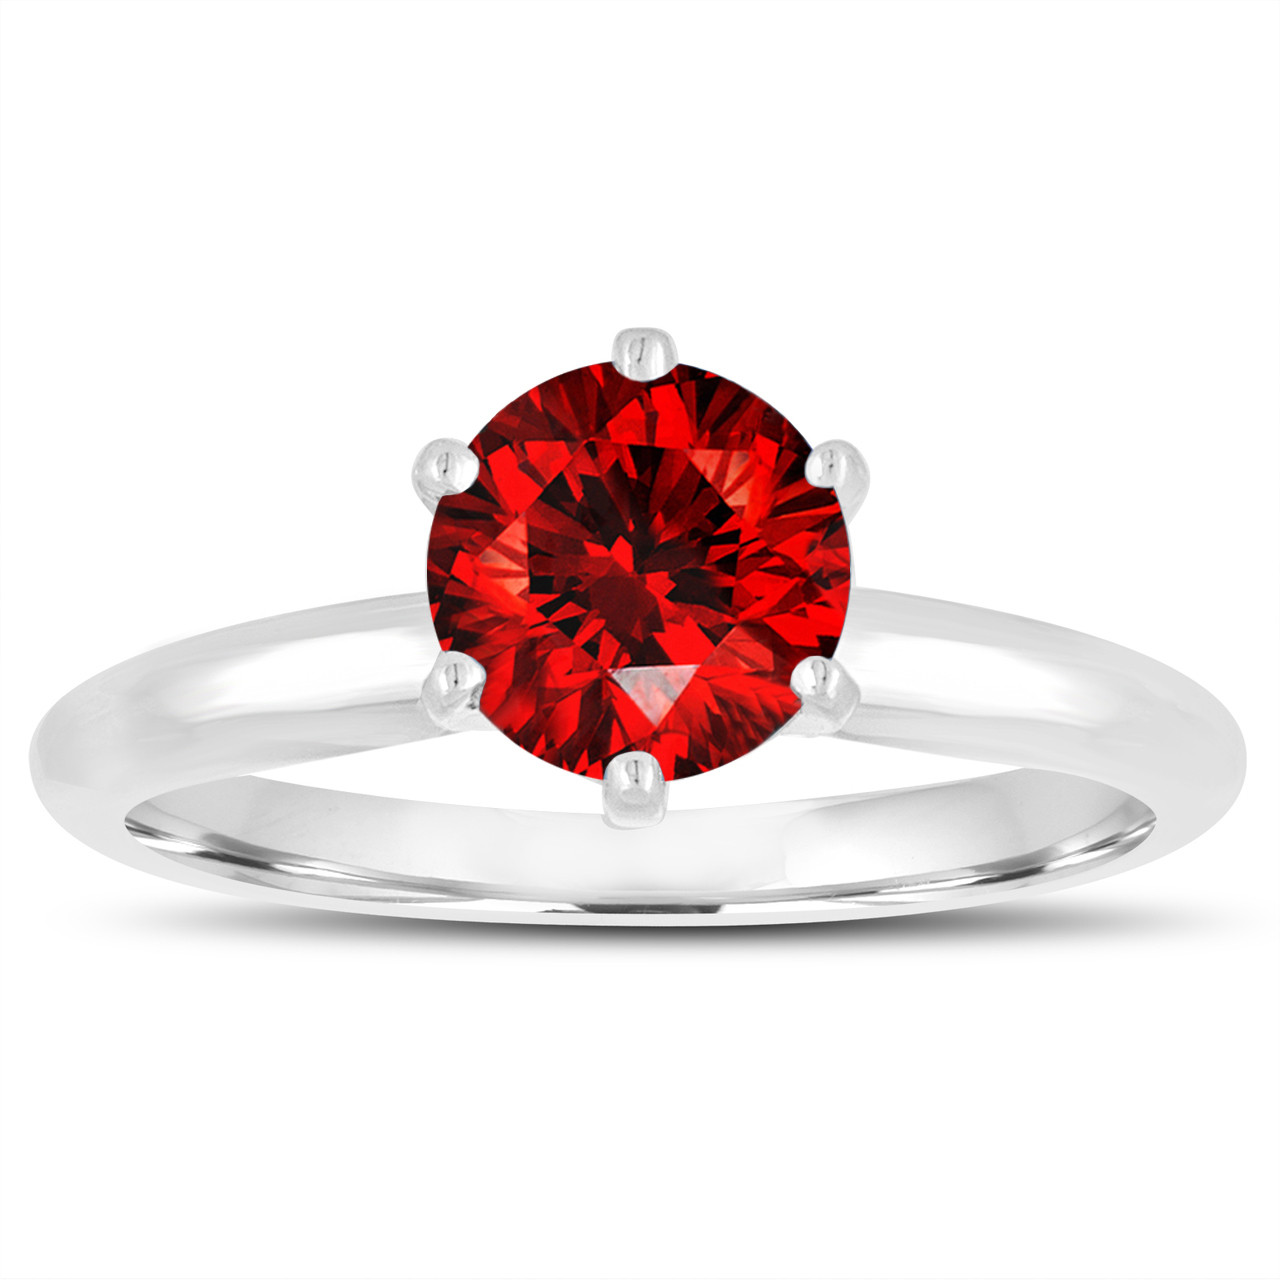 Red Diamond Engagement Ring
 0 70 Carat Fancy Red Diamond Solitaire Engagement Ring 14K